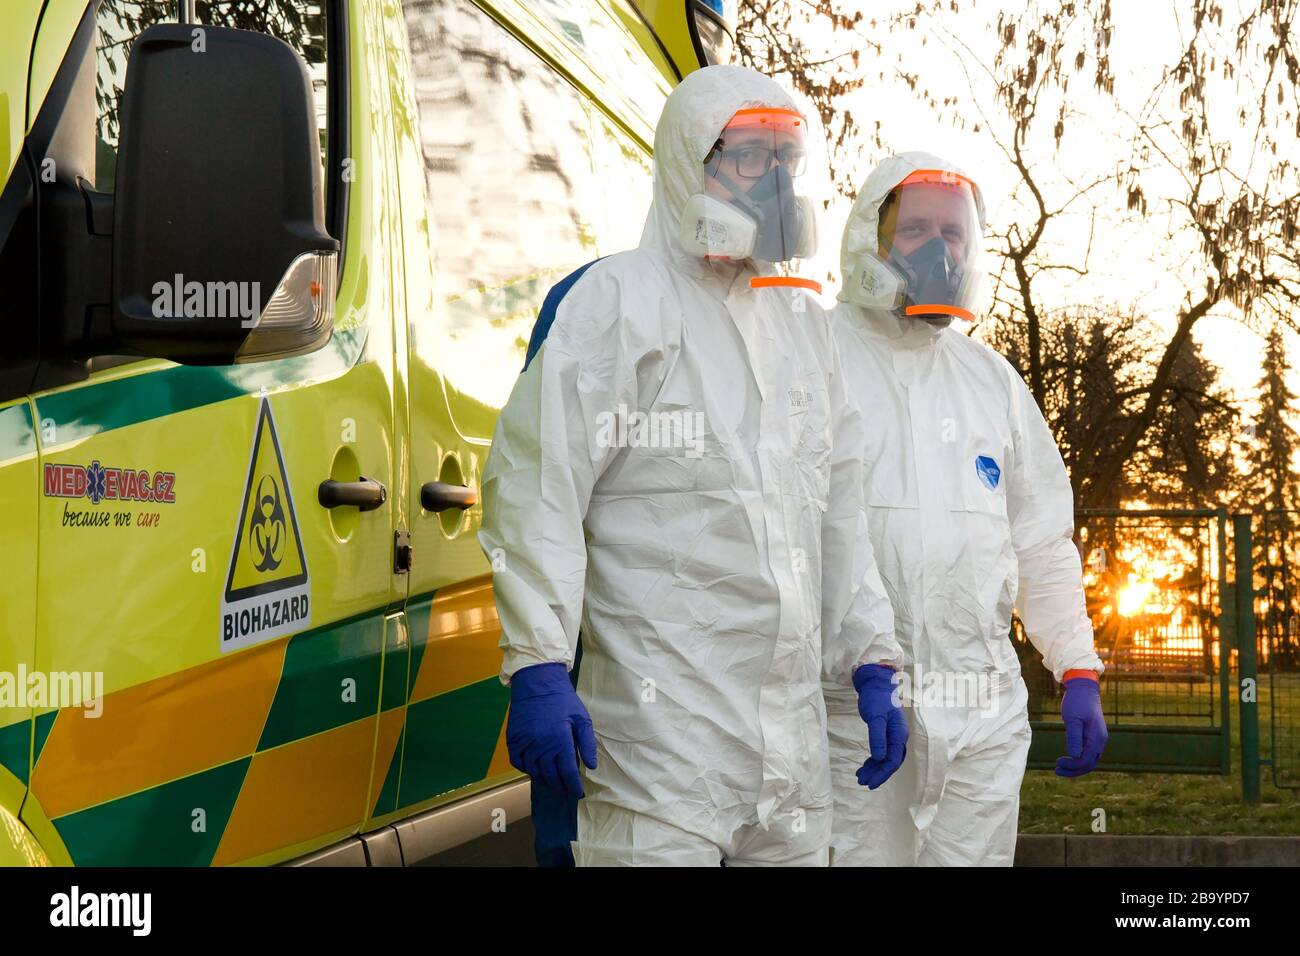 Mutejovice, Czech Republic. 24th Mar, 2020. Paramedics in a protective suits and special infectious ambulance for the collection of biological samples of patients suspected of being coronavirus infected are seen on March 24, 2020, at the base in Mutejovice, Rakovnik, Czech Republic. Credit: Jaroslav Benes/CTK Photo/Alamy Live News Stock Photo